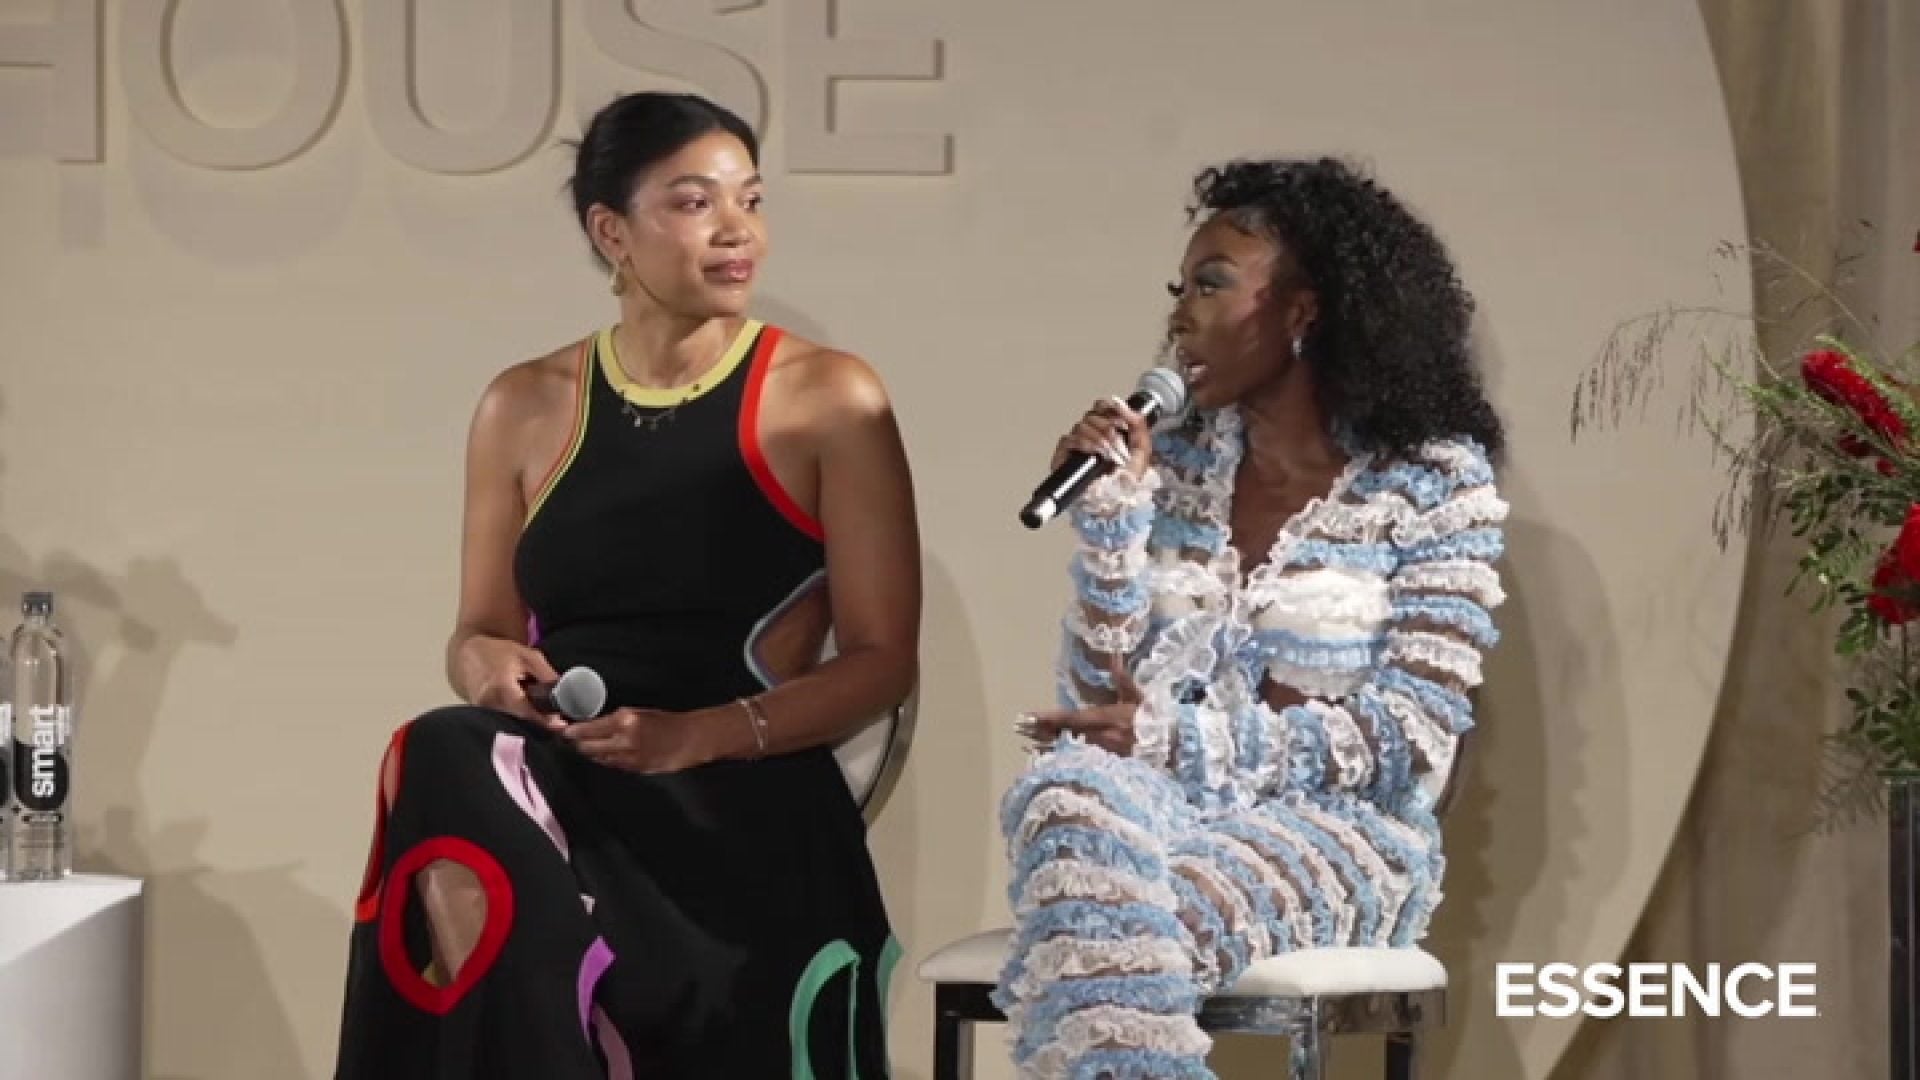 WATCH: FASHION HOUSE: The Challenges Of Owning A Business As Black Women